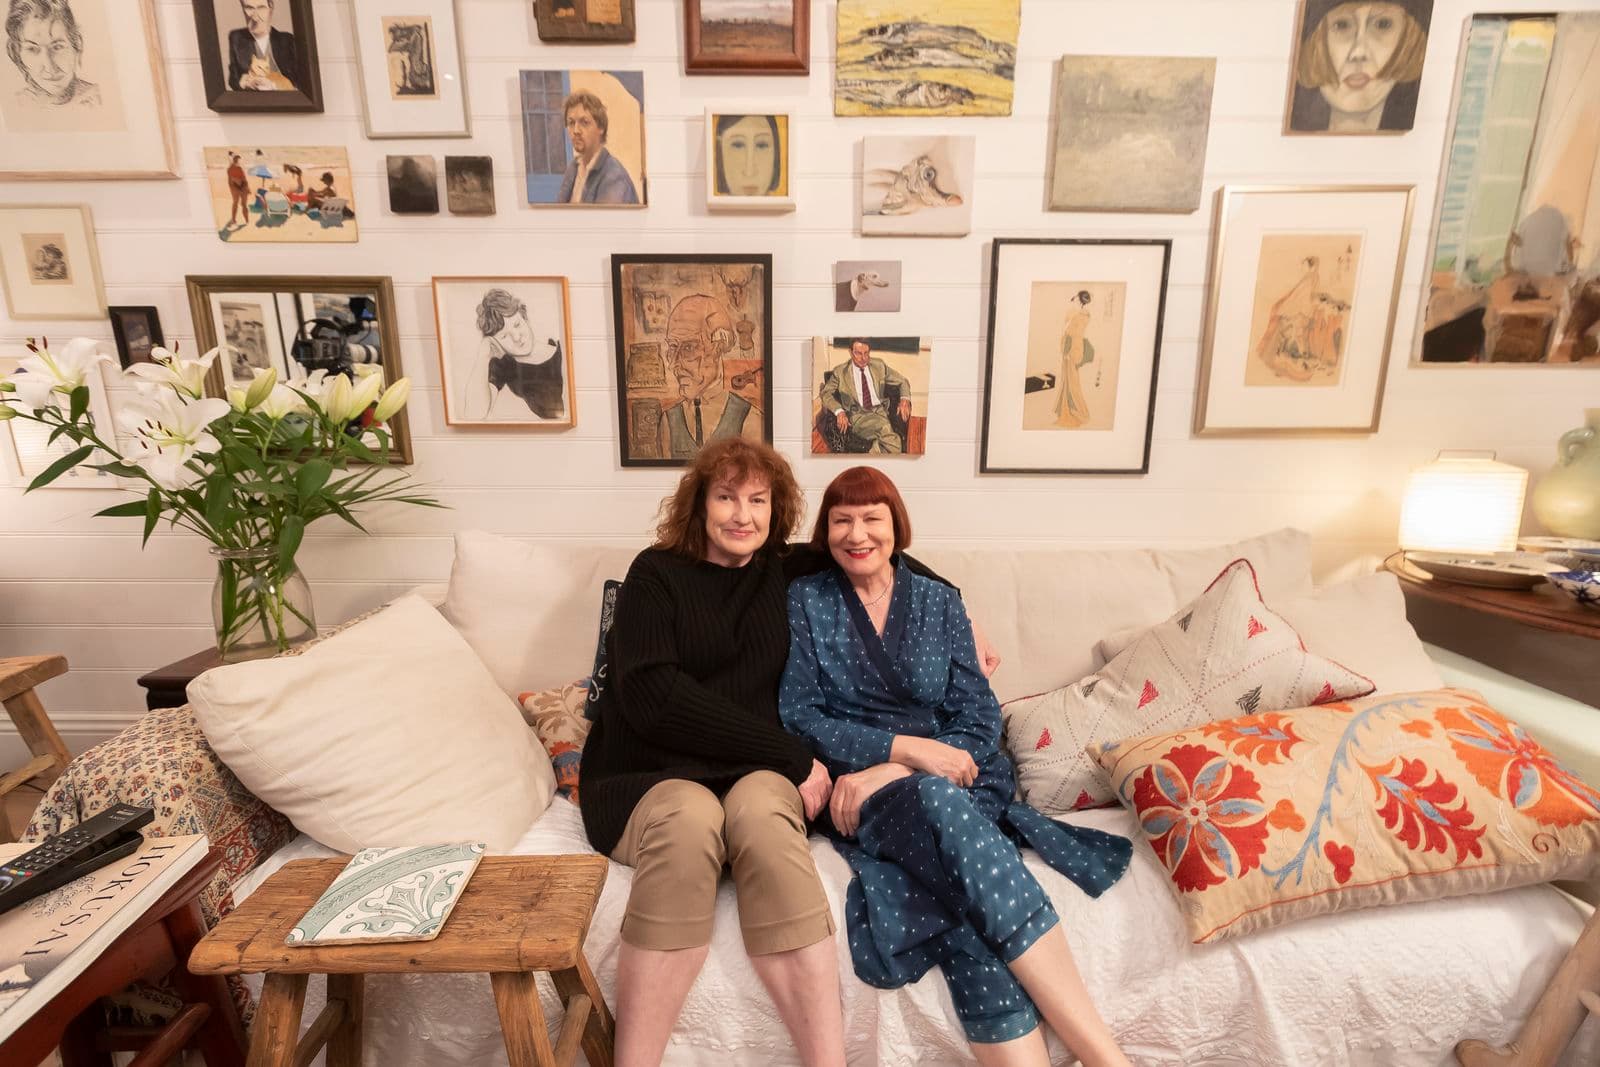 Two smiling women sitting on a couch with a collection of artworks hung on a wall behind them